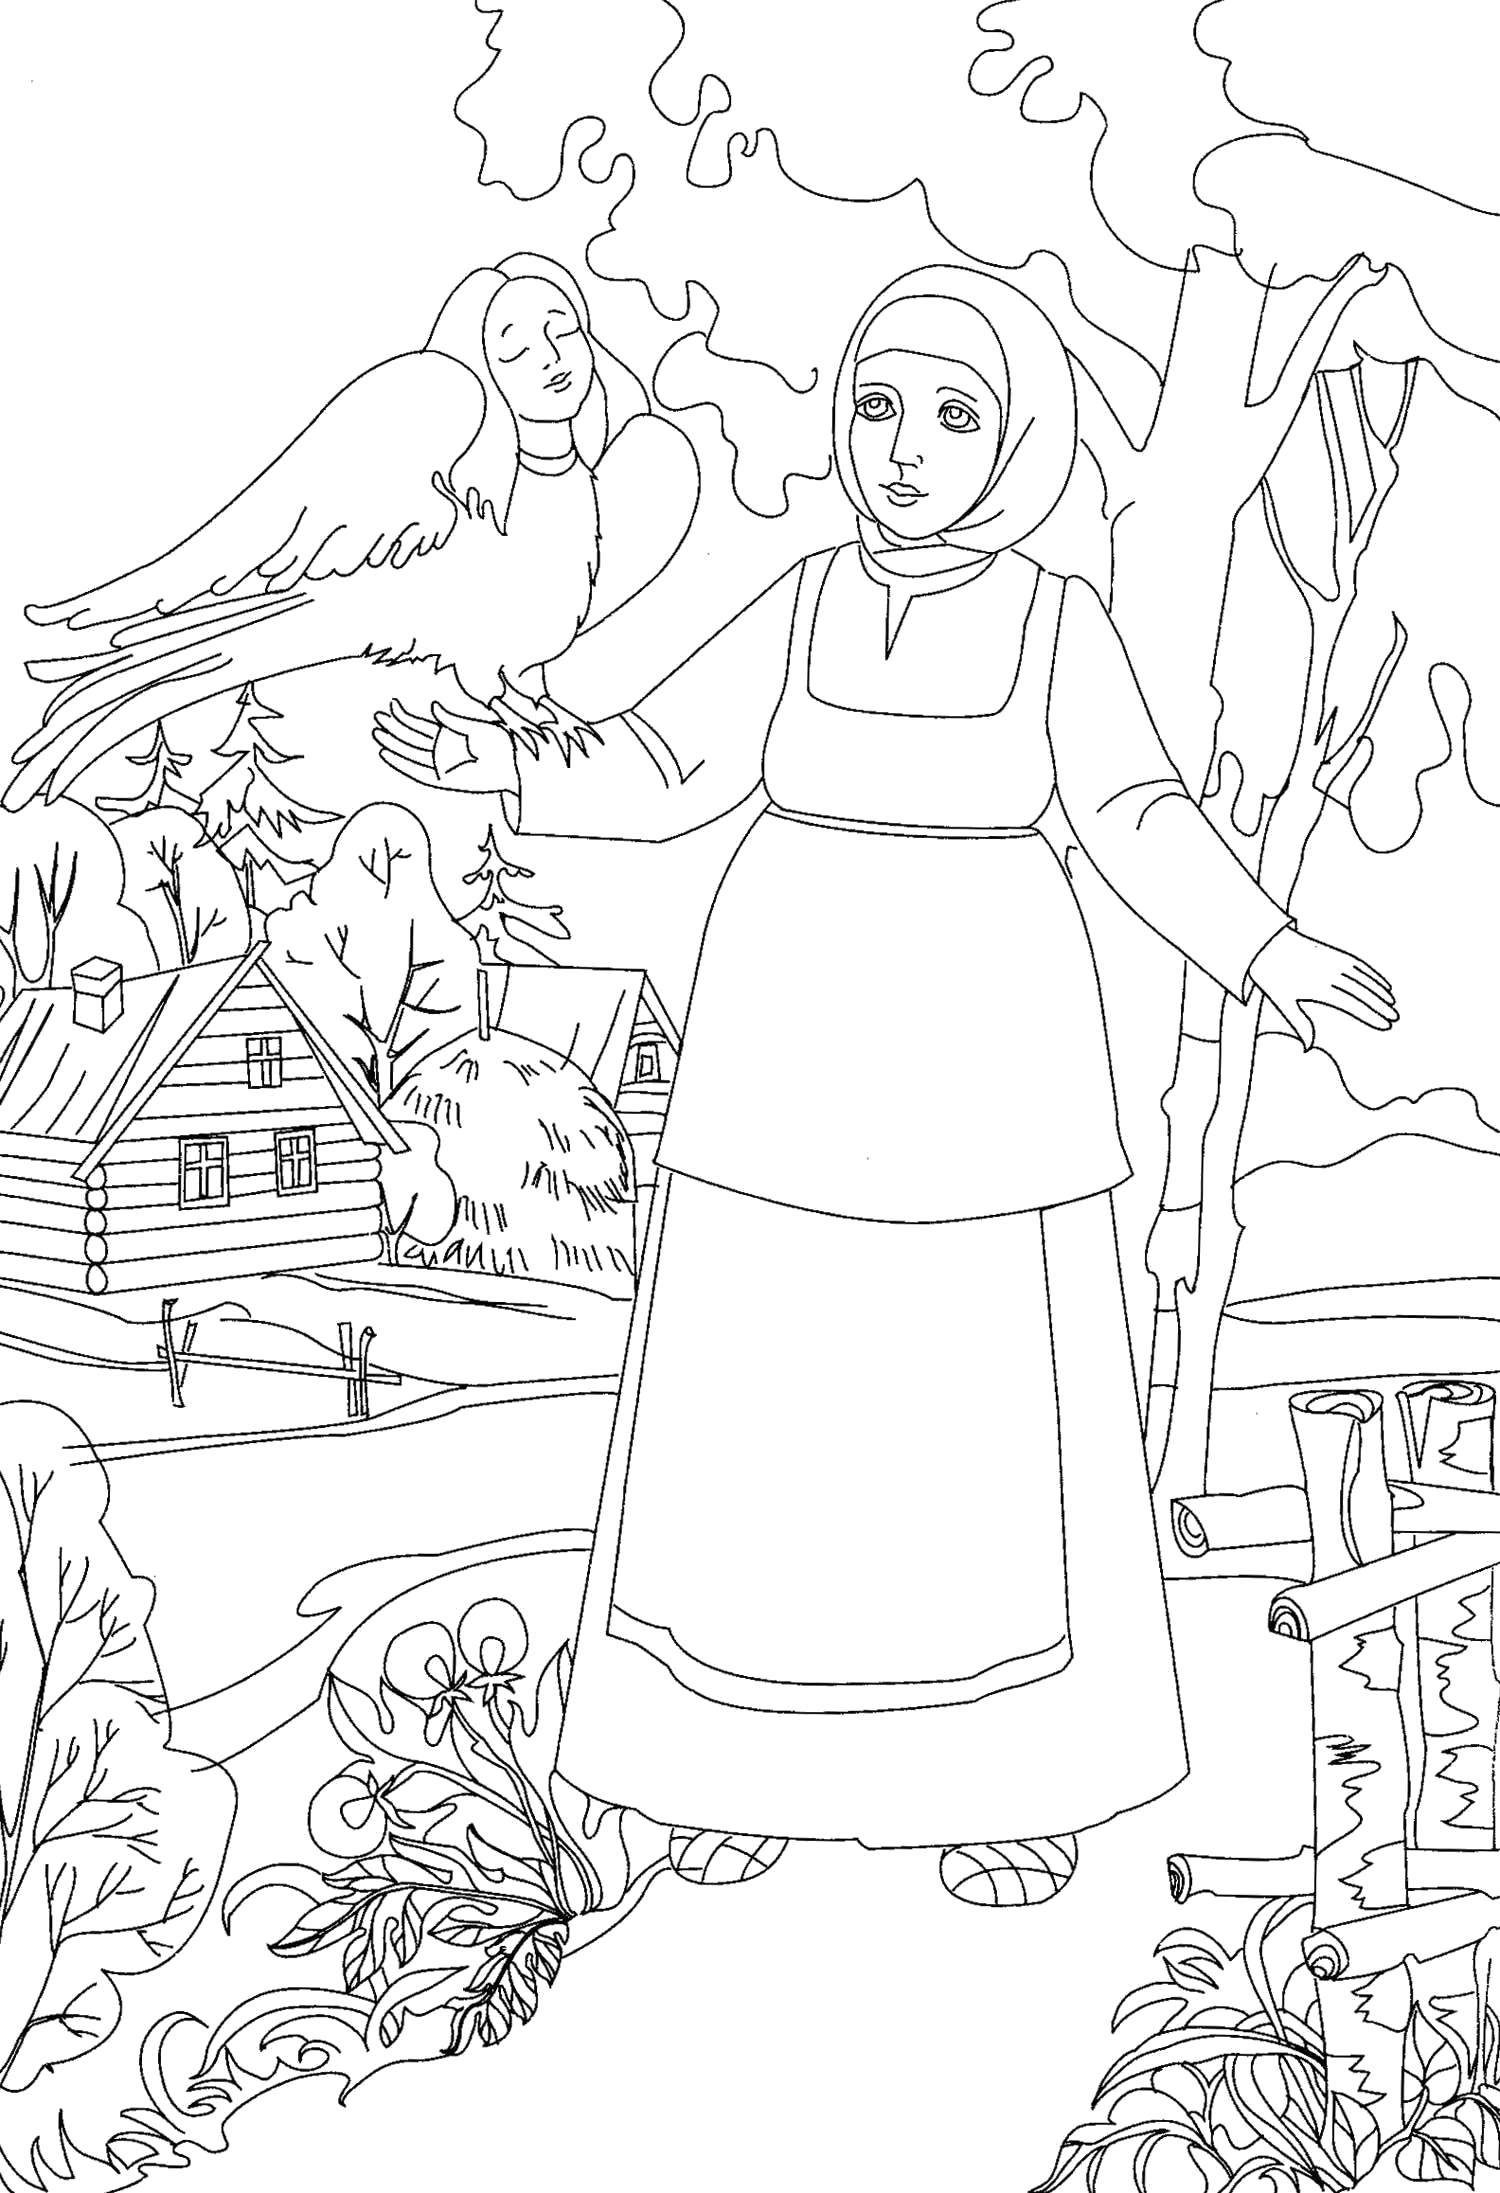 Coloring Phoenix. Category Fairy tales. Tags:  Fairy tales.